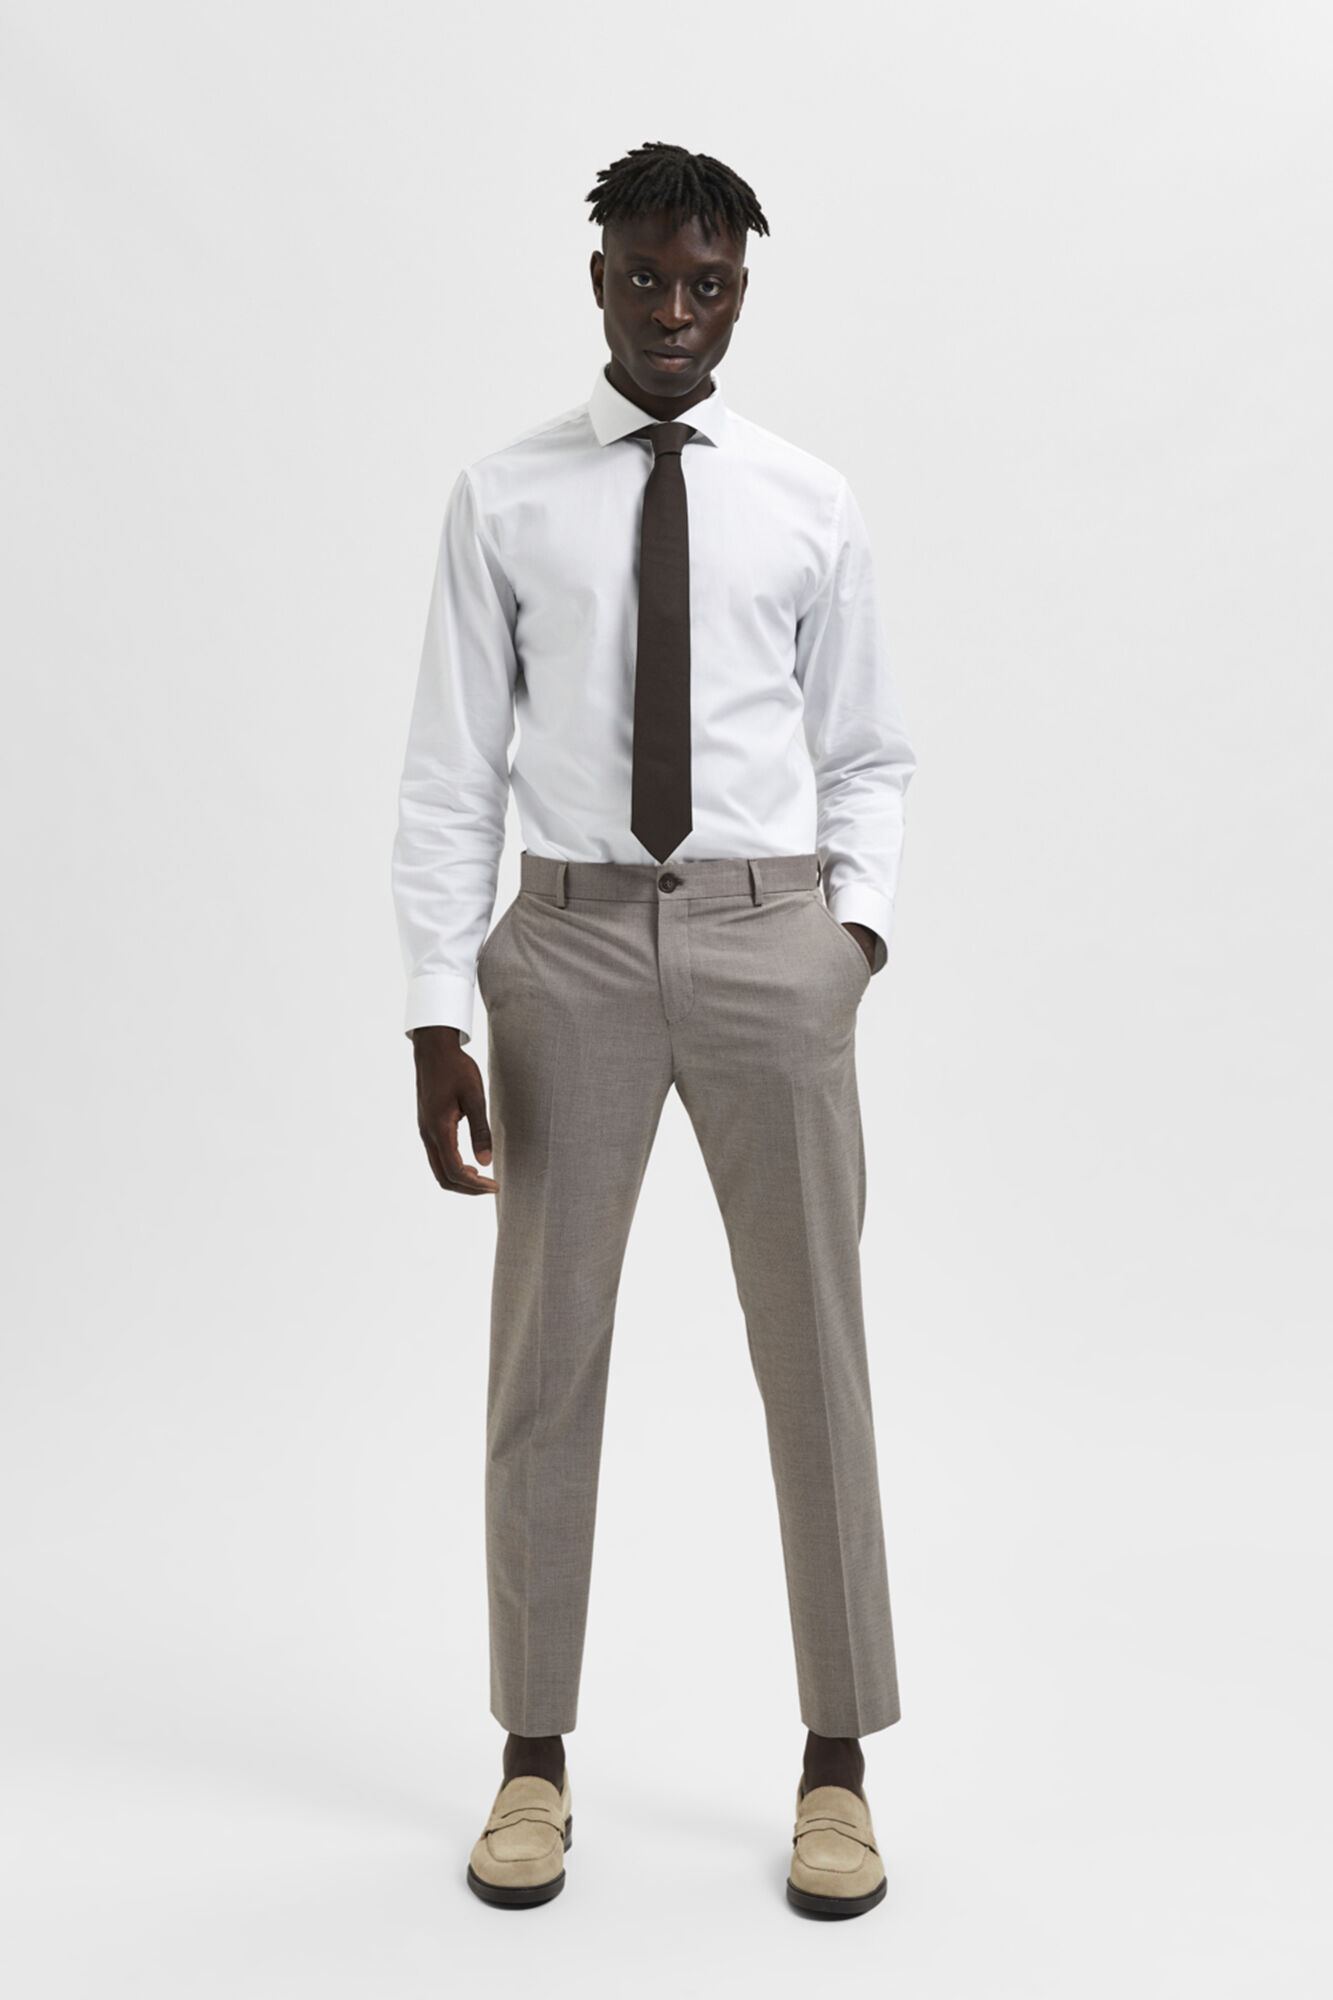 Regular Fit Pure Wool Textured Suit Trousers | M&S SARTORIAL | M&S